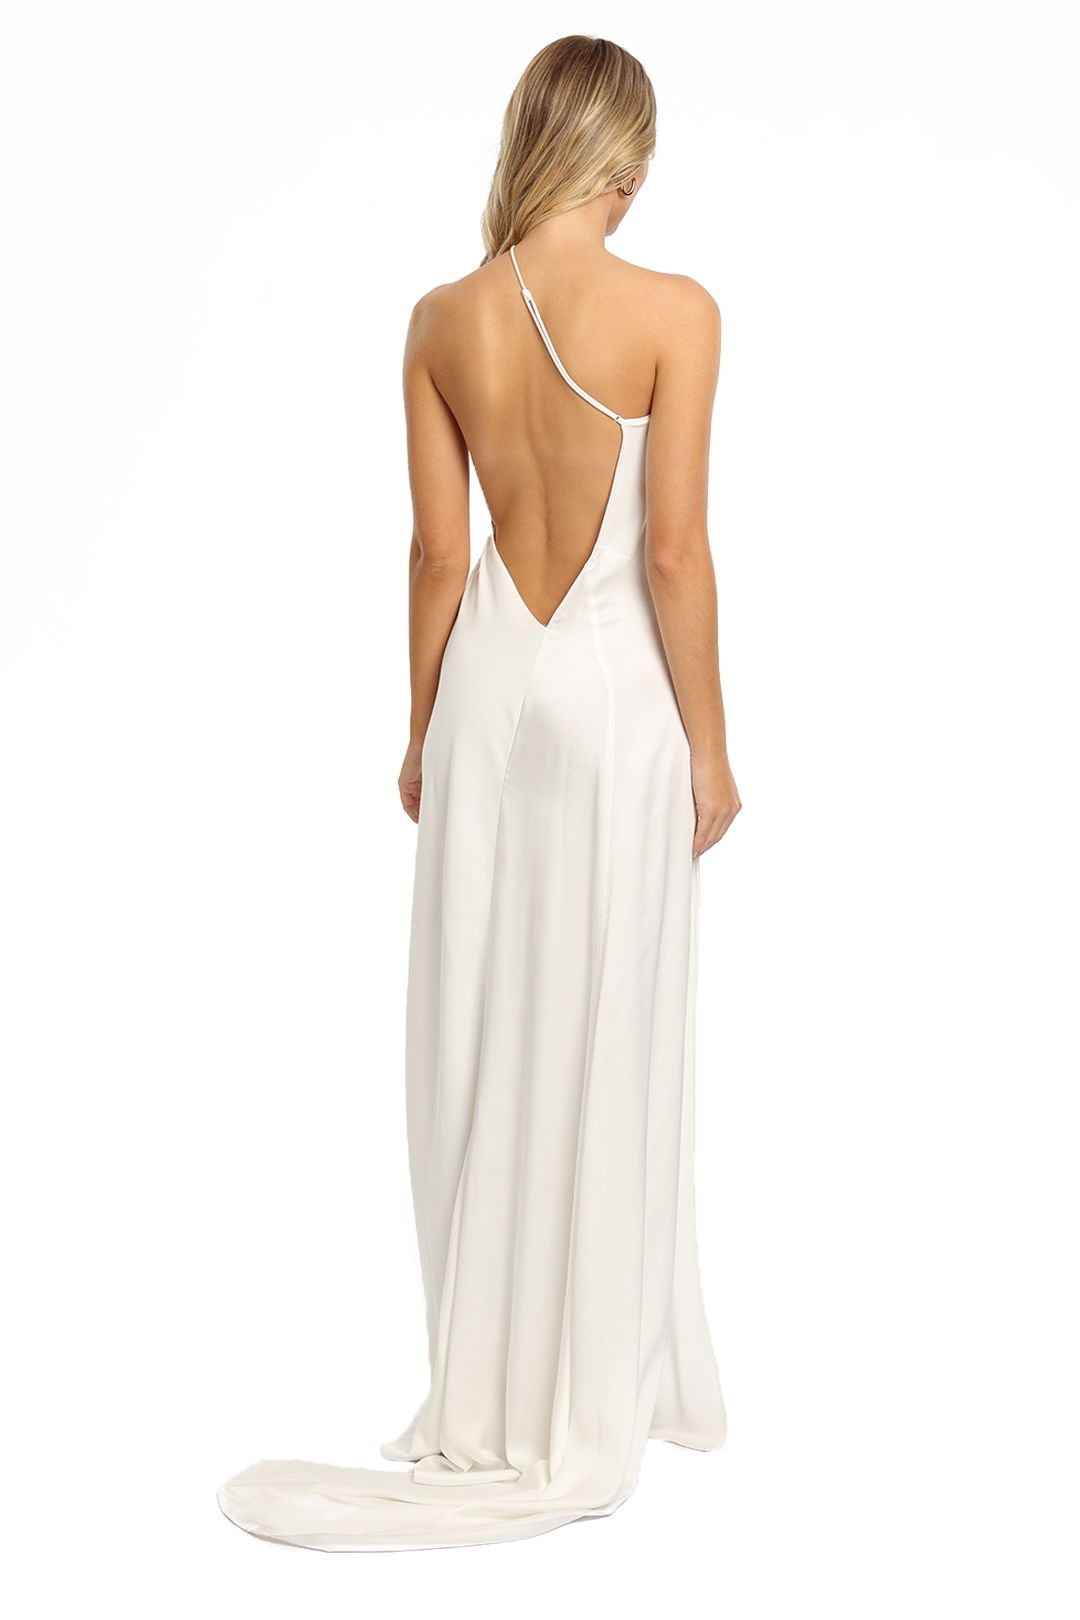 Lexi Angelica Dress backless